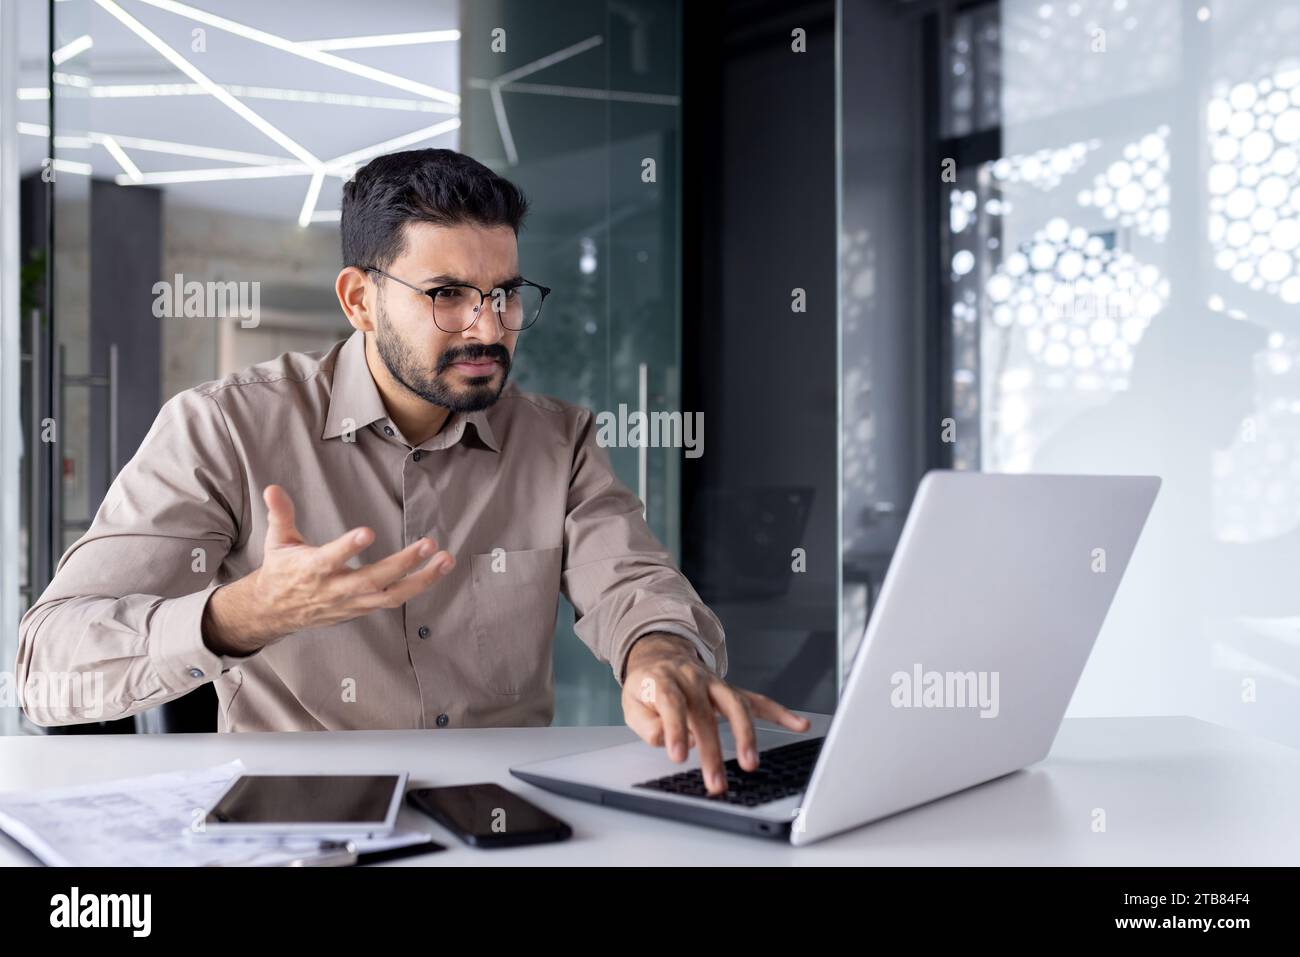 Idle computer, broken laptop at workplace, unhappy angry businessman at workplace shouting unhappy with slow software. Stock Photo